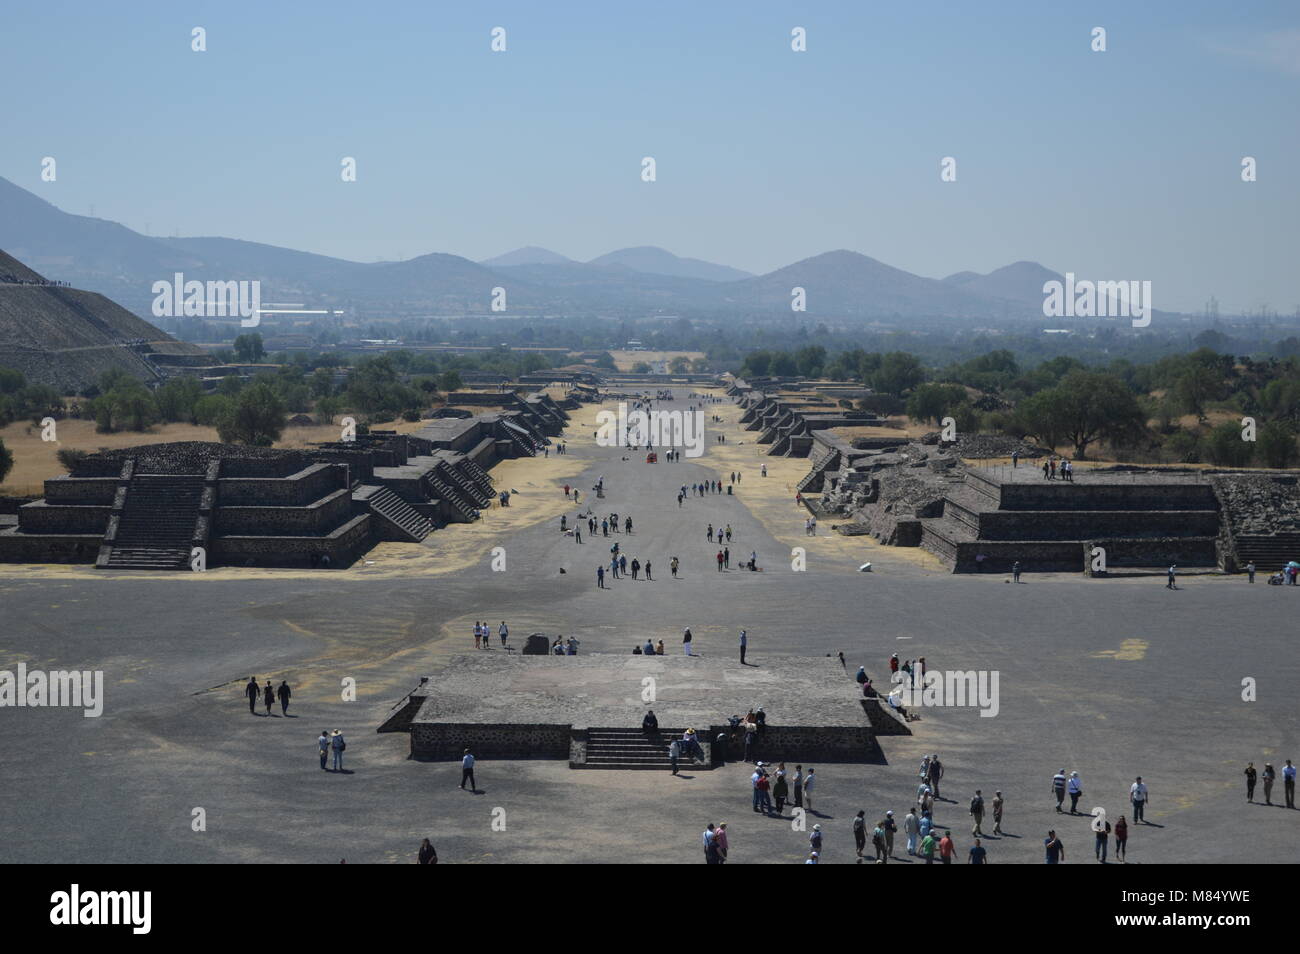 A view down the Avenue of the Dead from the Pyramid of the Moon in Teotihuacan, Mexico Stock Photo